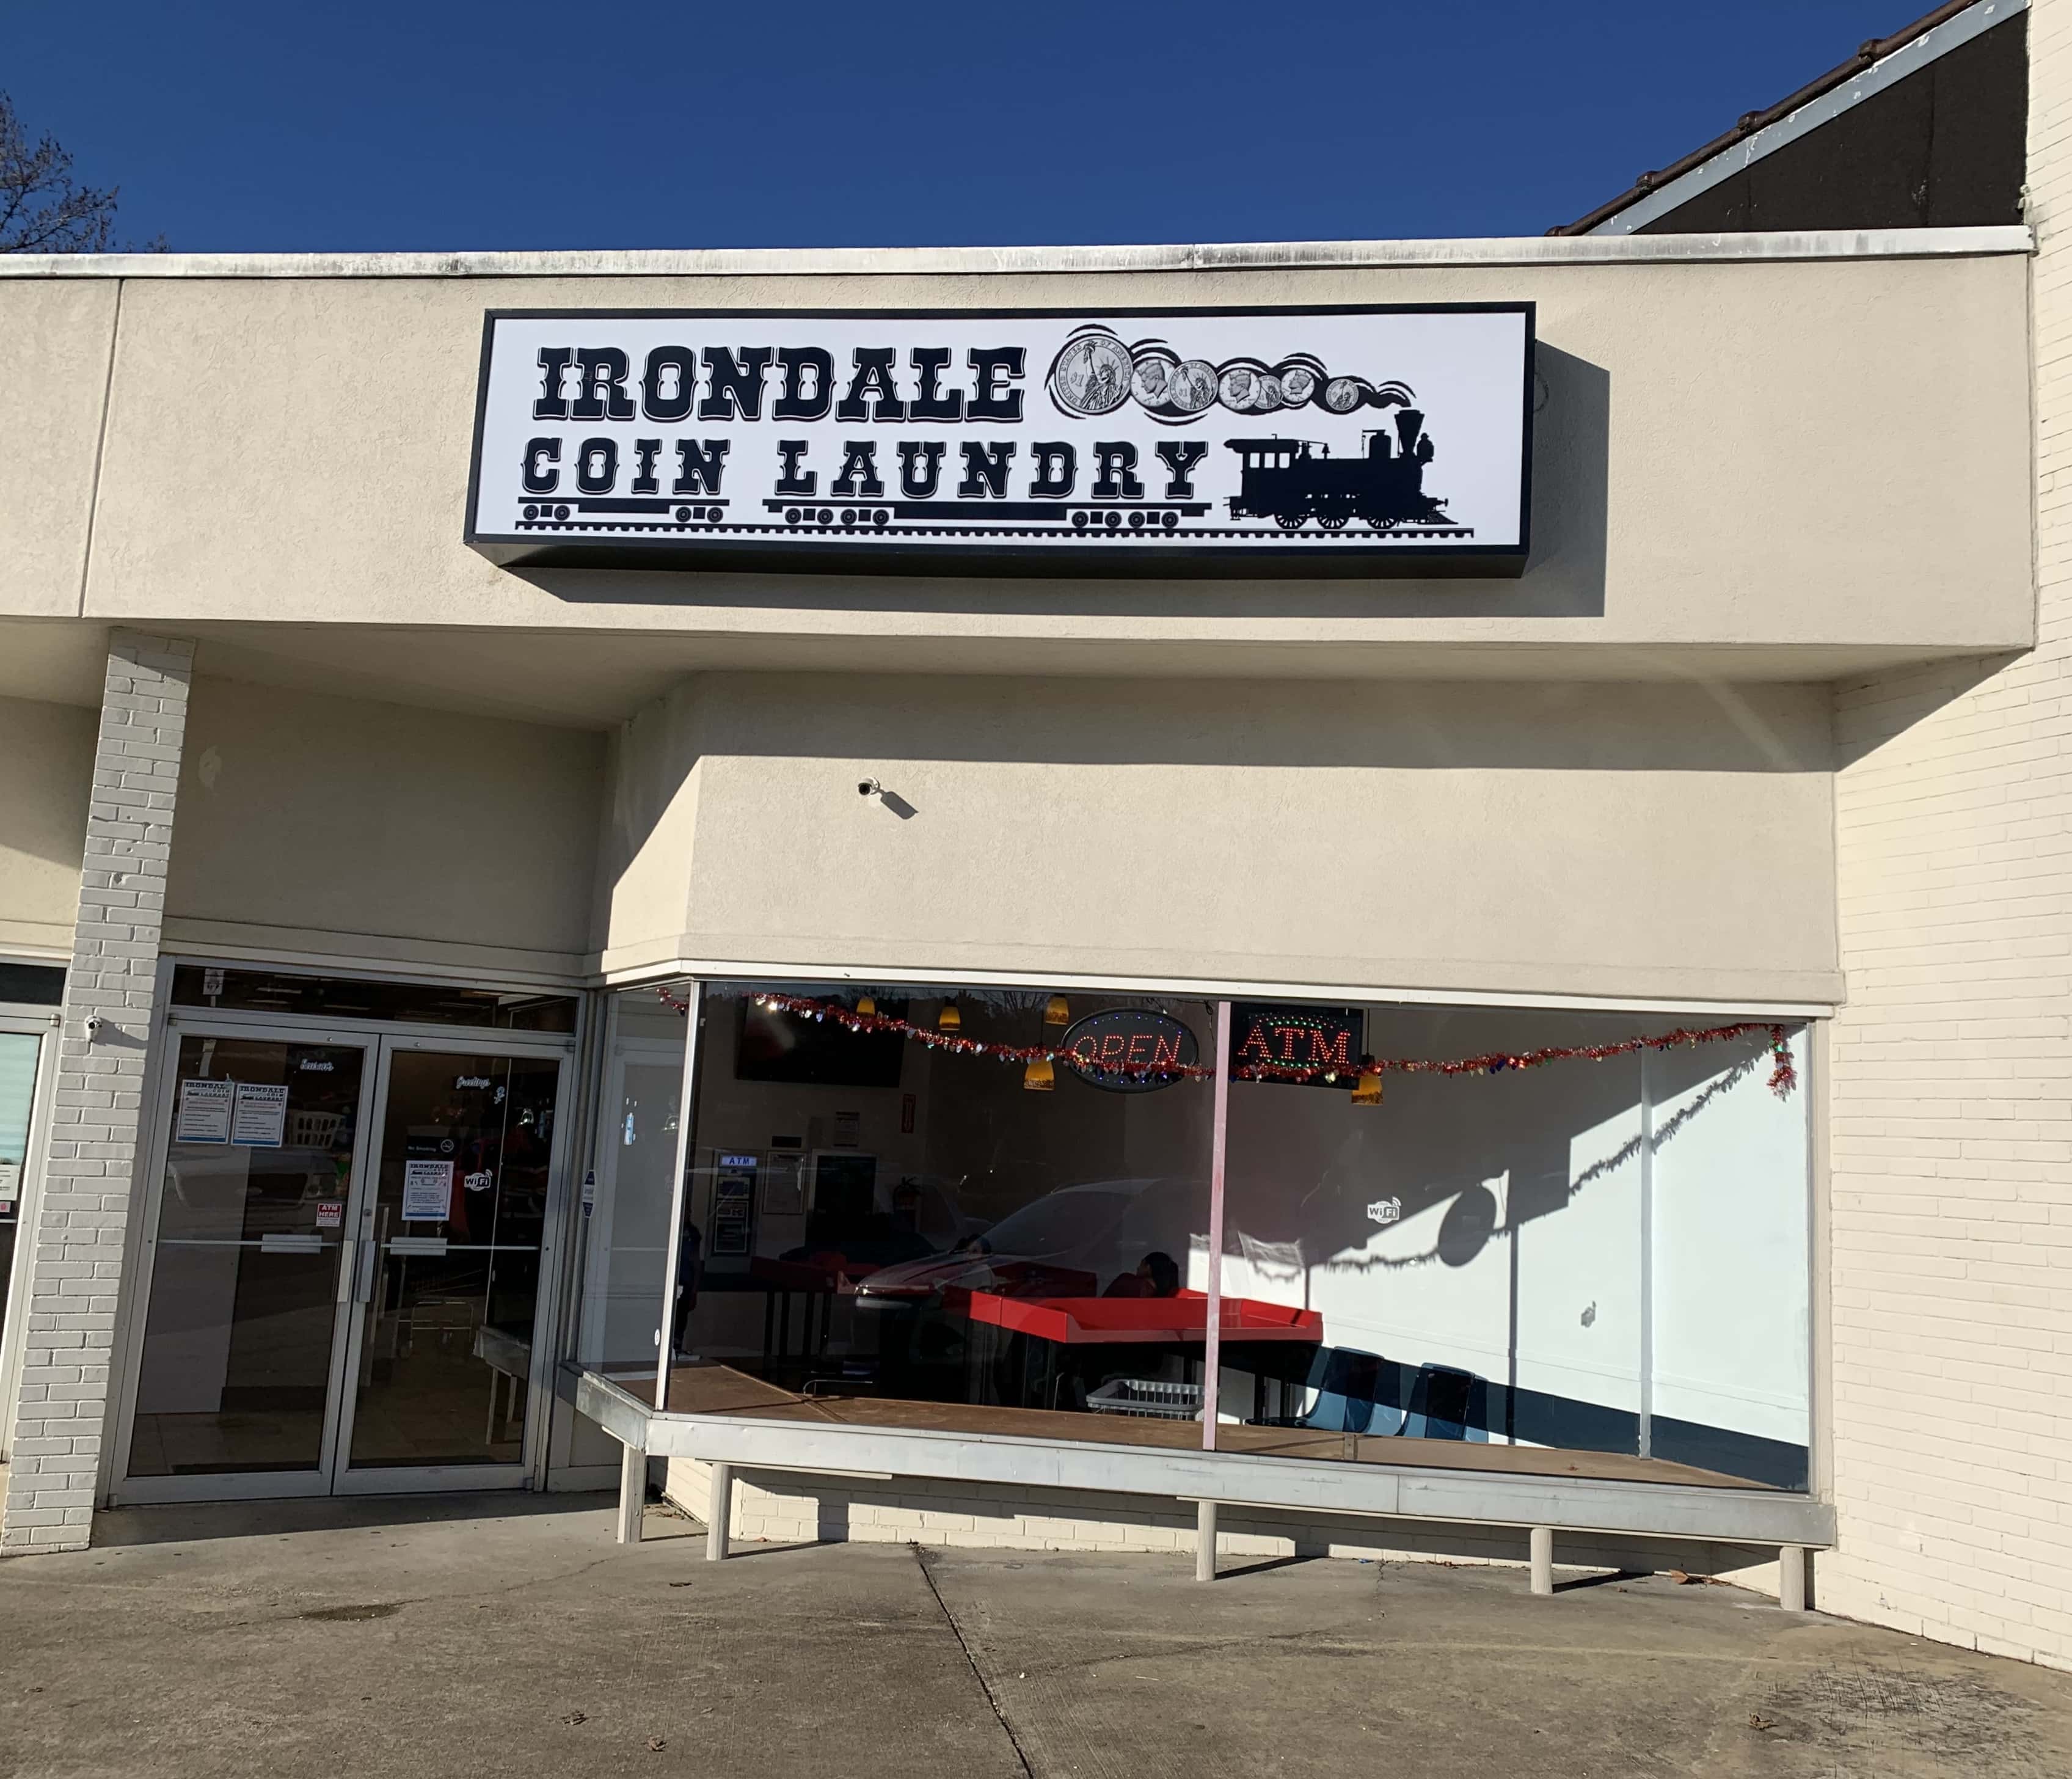 Irondale Coin Laundry, US, 24 hour laundromat near me open now